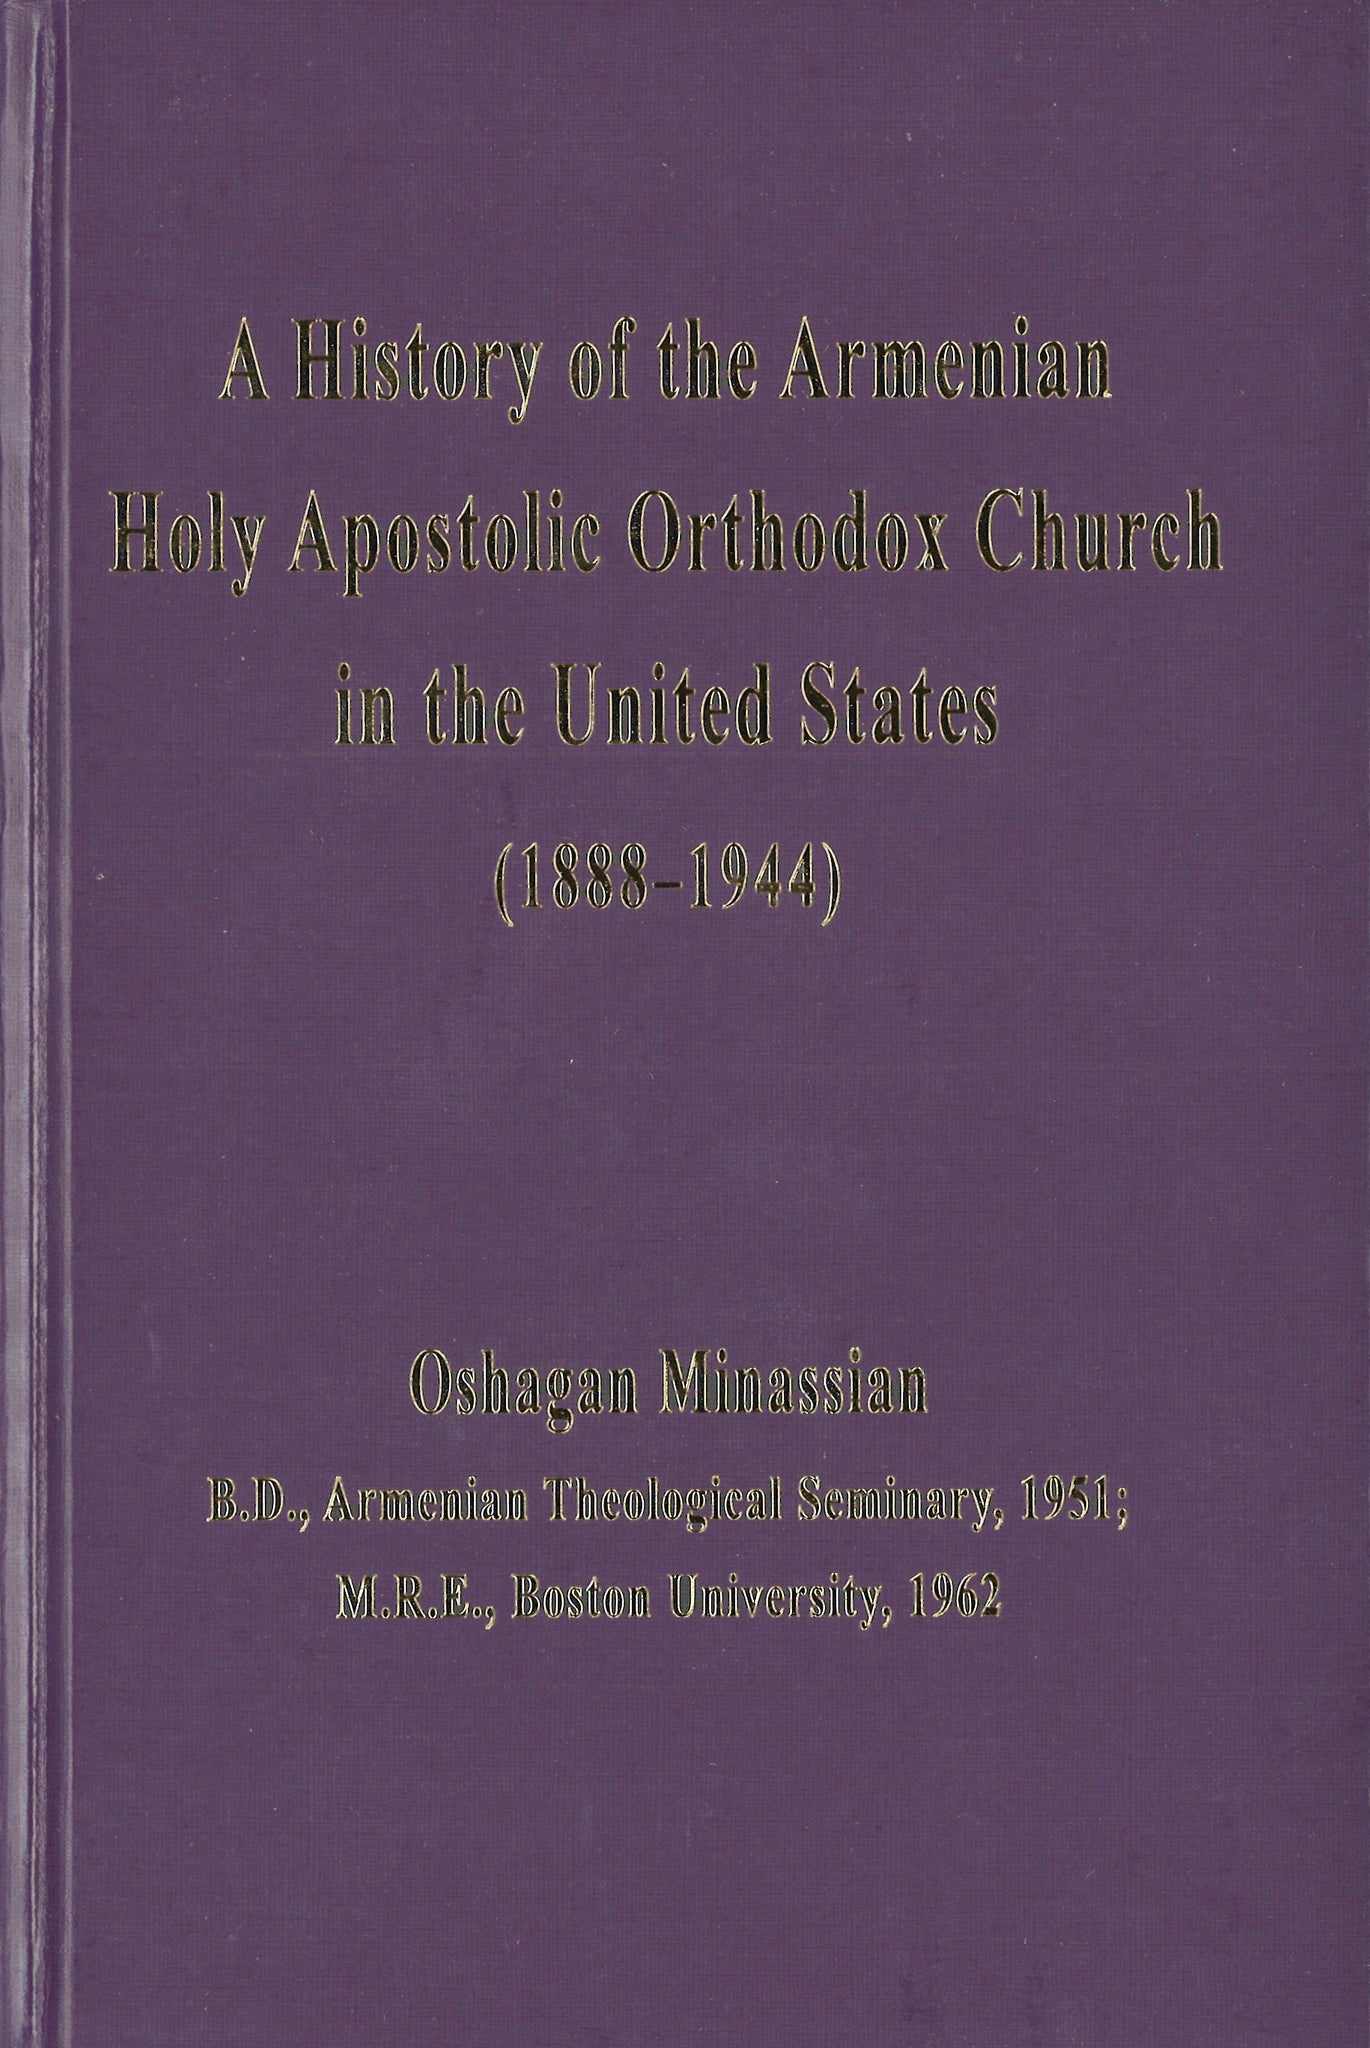 HISTORY OF THE ARMENIAN HOLY APOSTOLIC ORTHODOX CHURCH IN THE UNITED STATES (1888-1944)